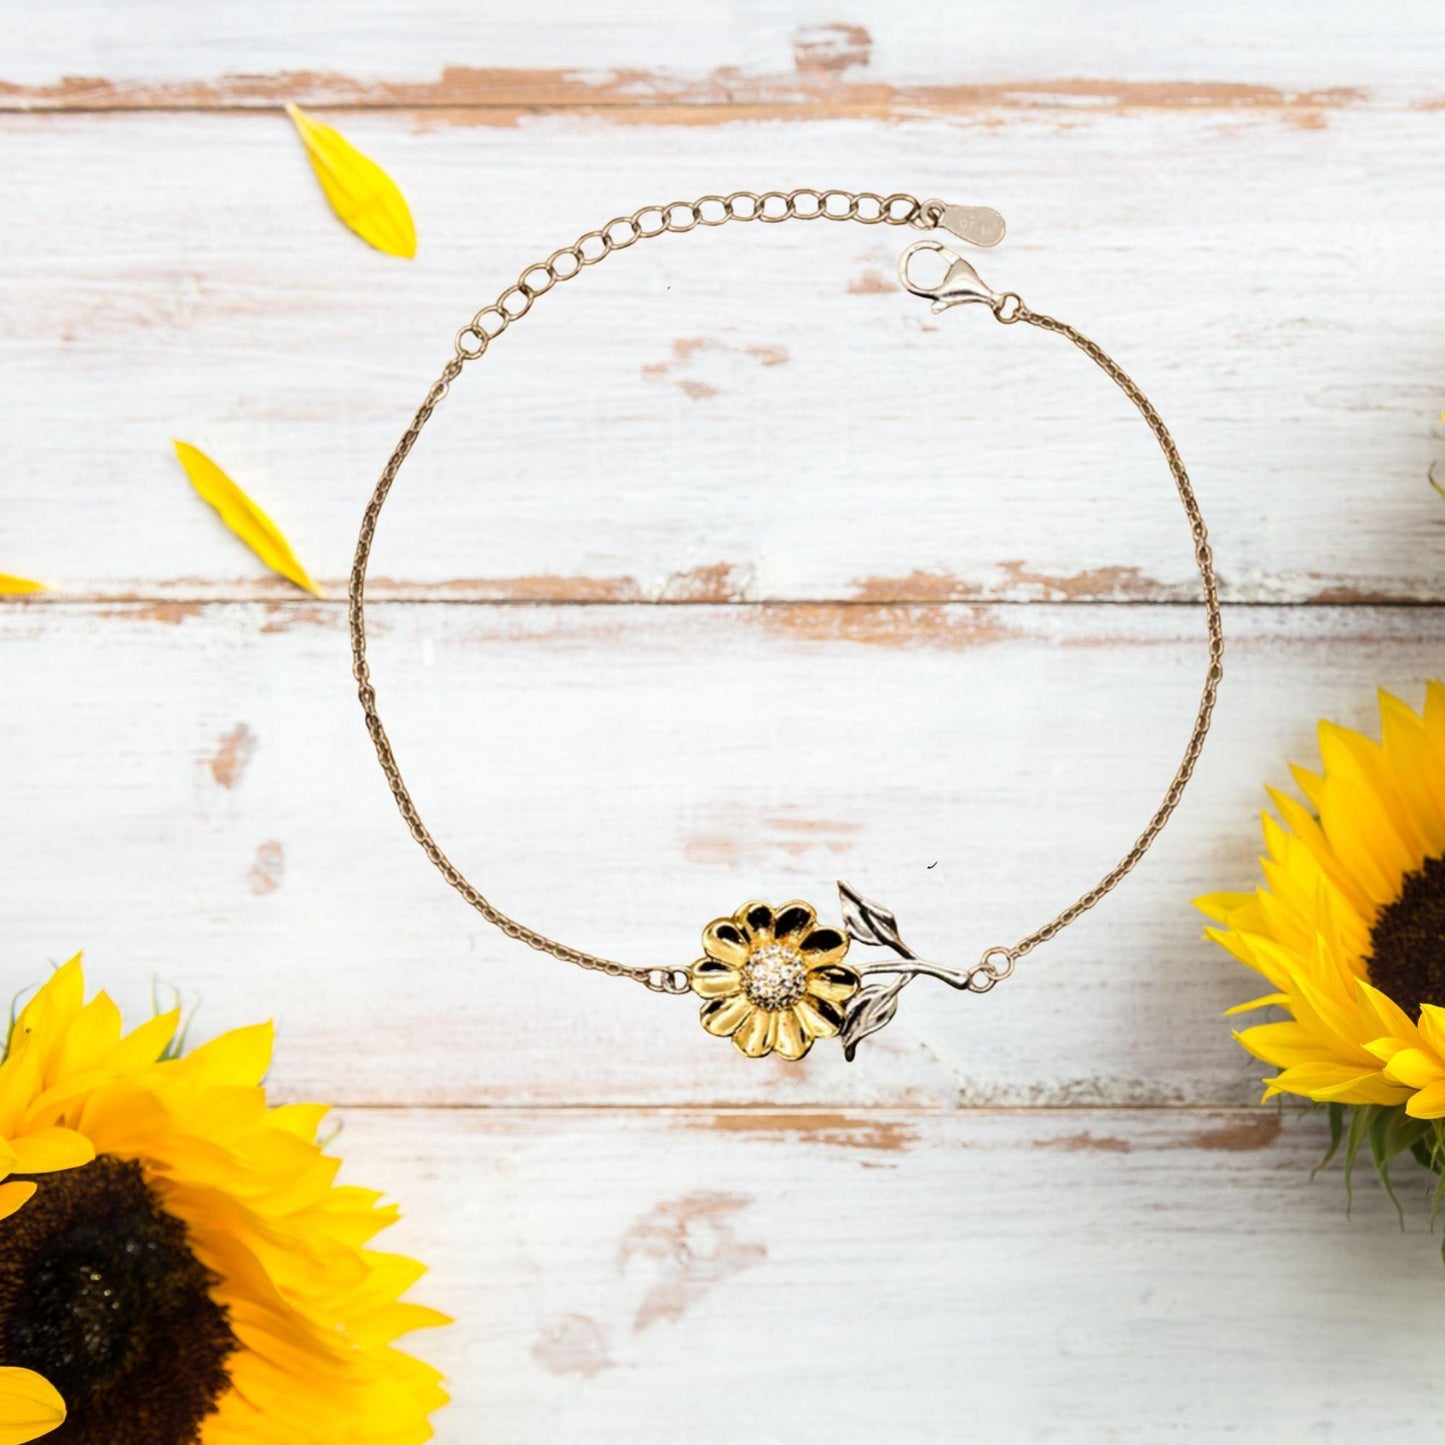 Aircraft Mechanic Sunflower Bracelet - Thanks for being who you are - Birthday Christmas Jewelry Gifts Coworkers Colleague Boss - Mallard Moon Gift Shop